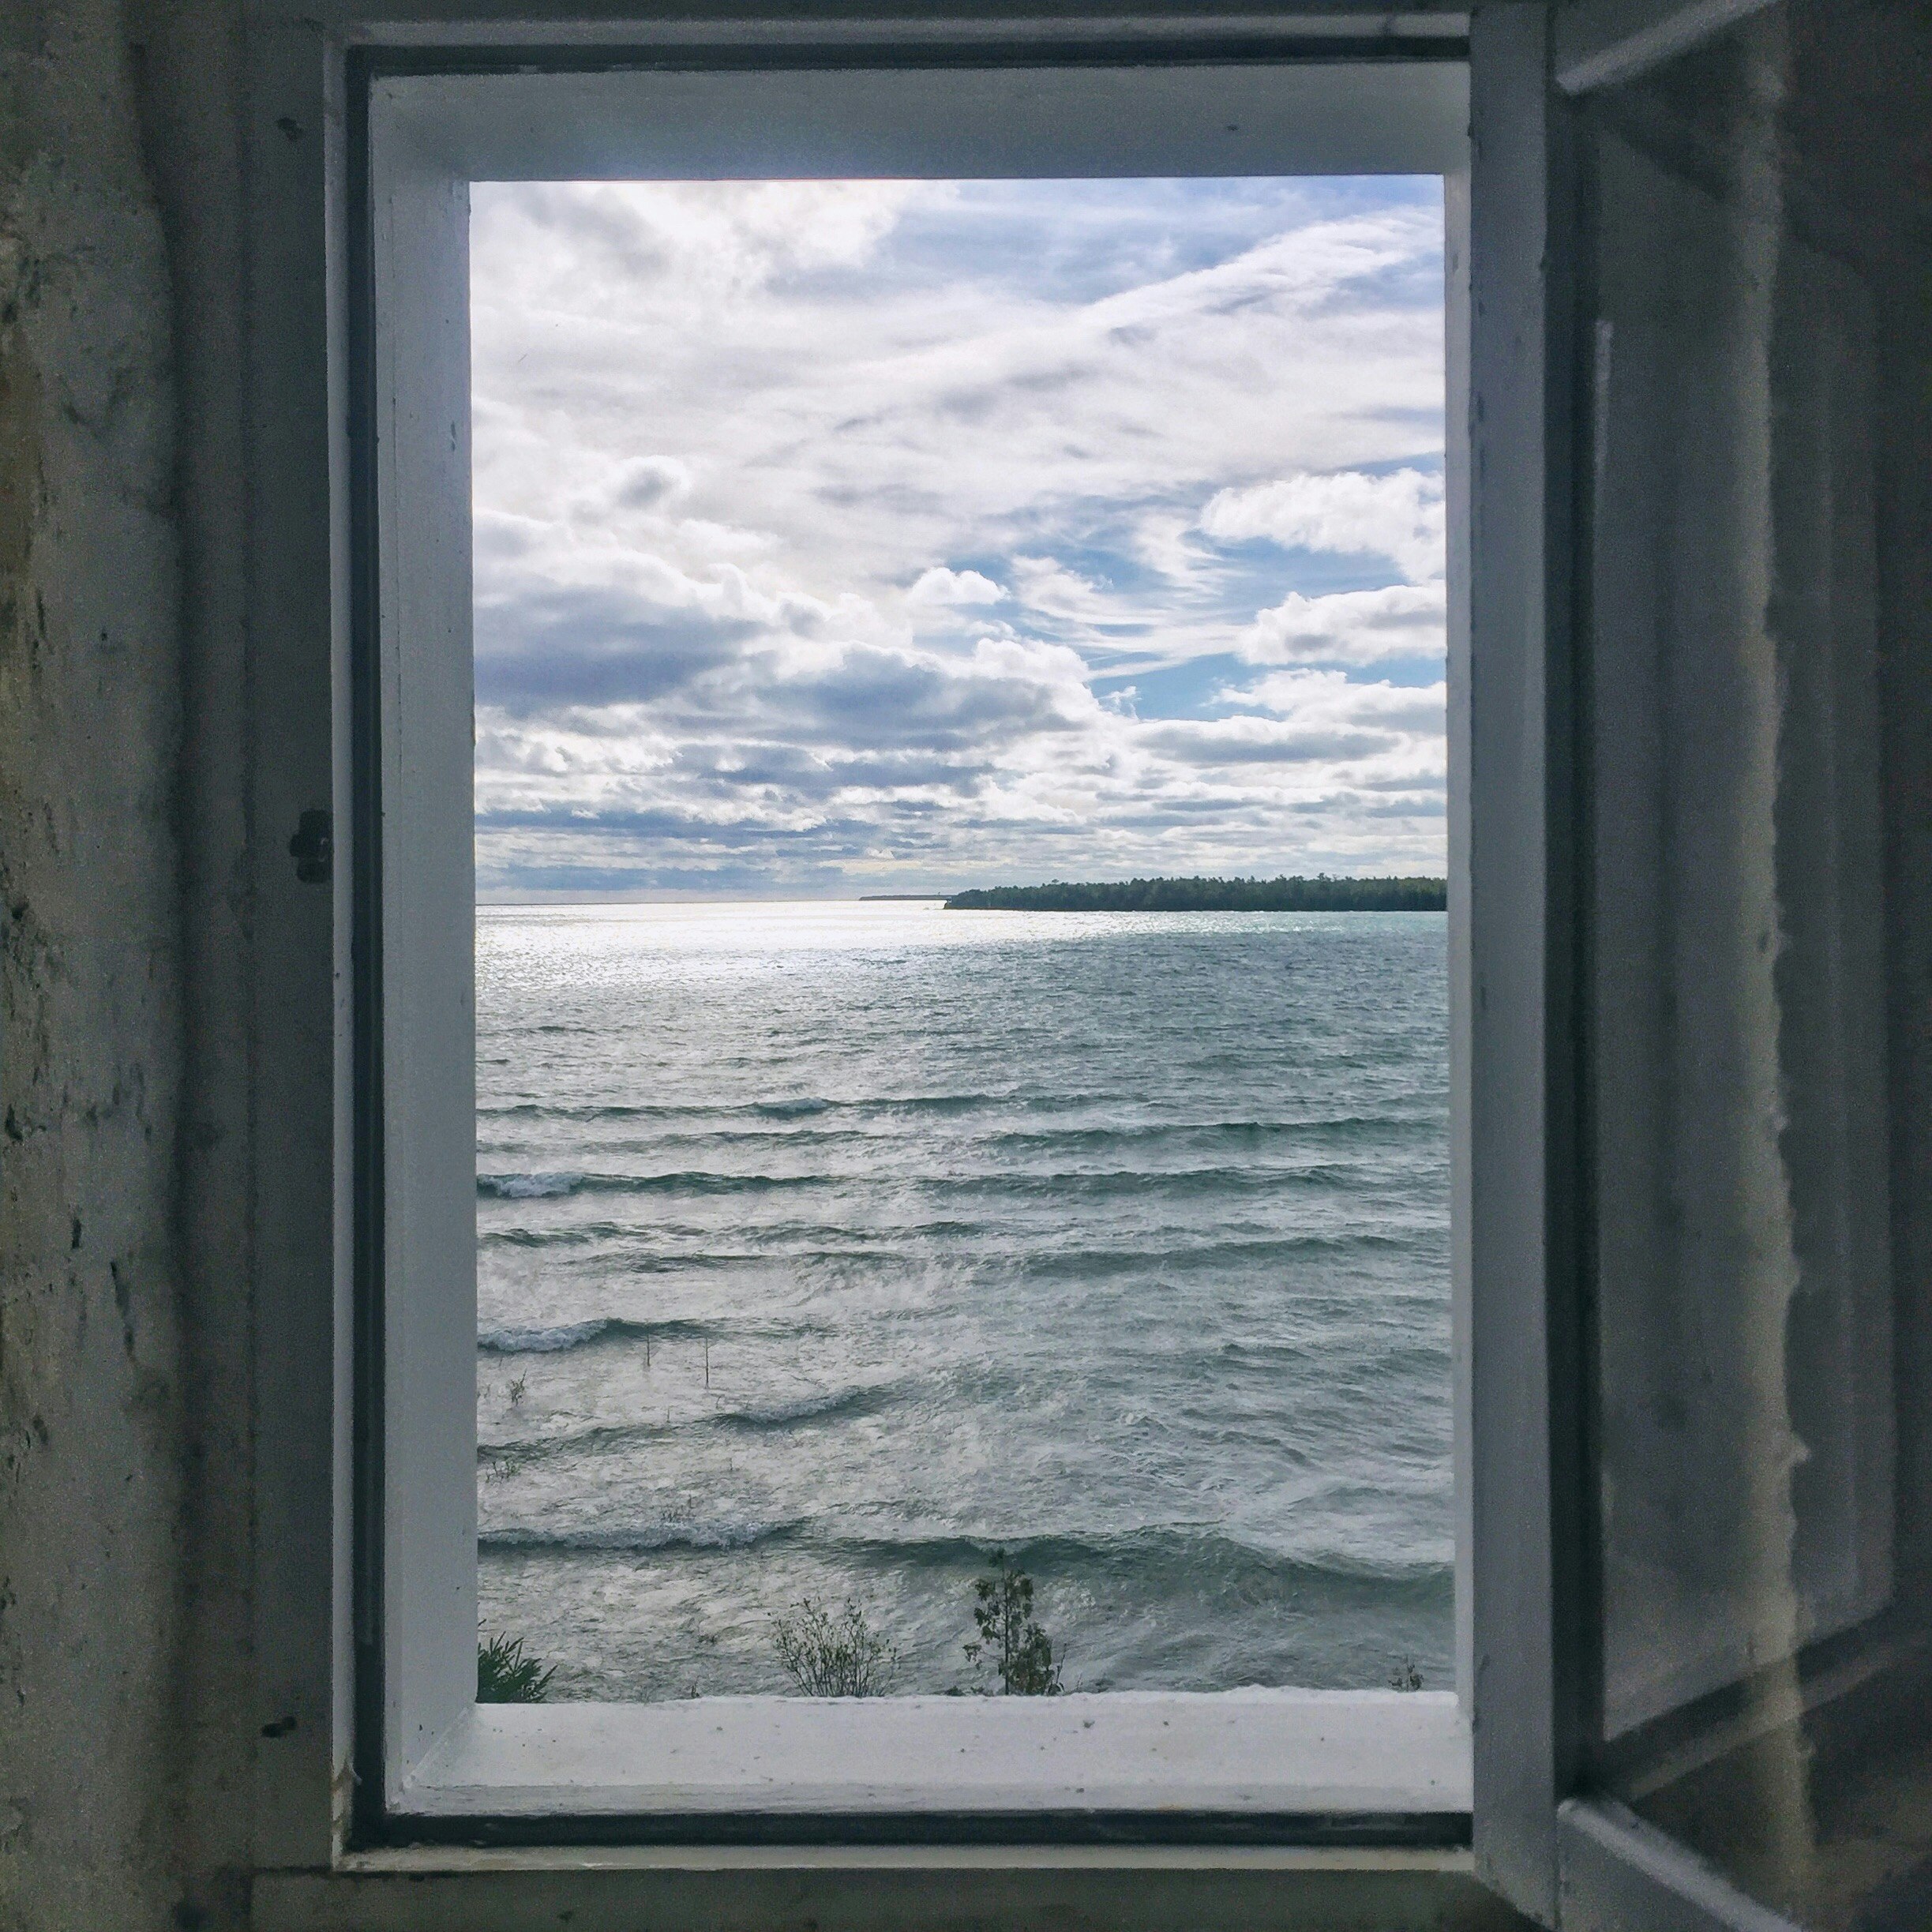 View of Lake Huron waves from Presque Isle Lighthouse in Alpena, Michigan. The scene is framed through a whitewashed window frame.